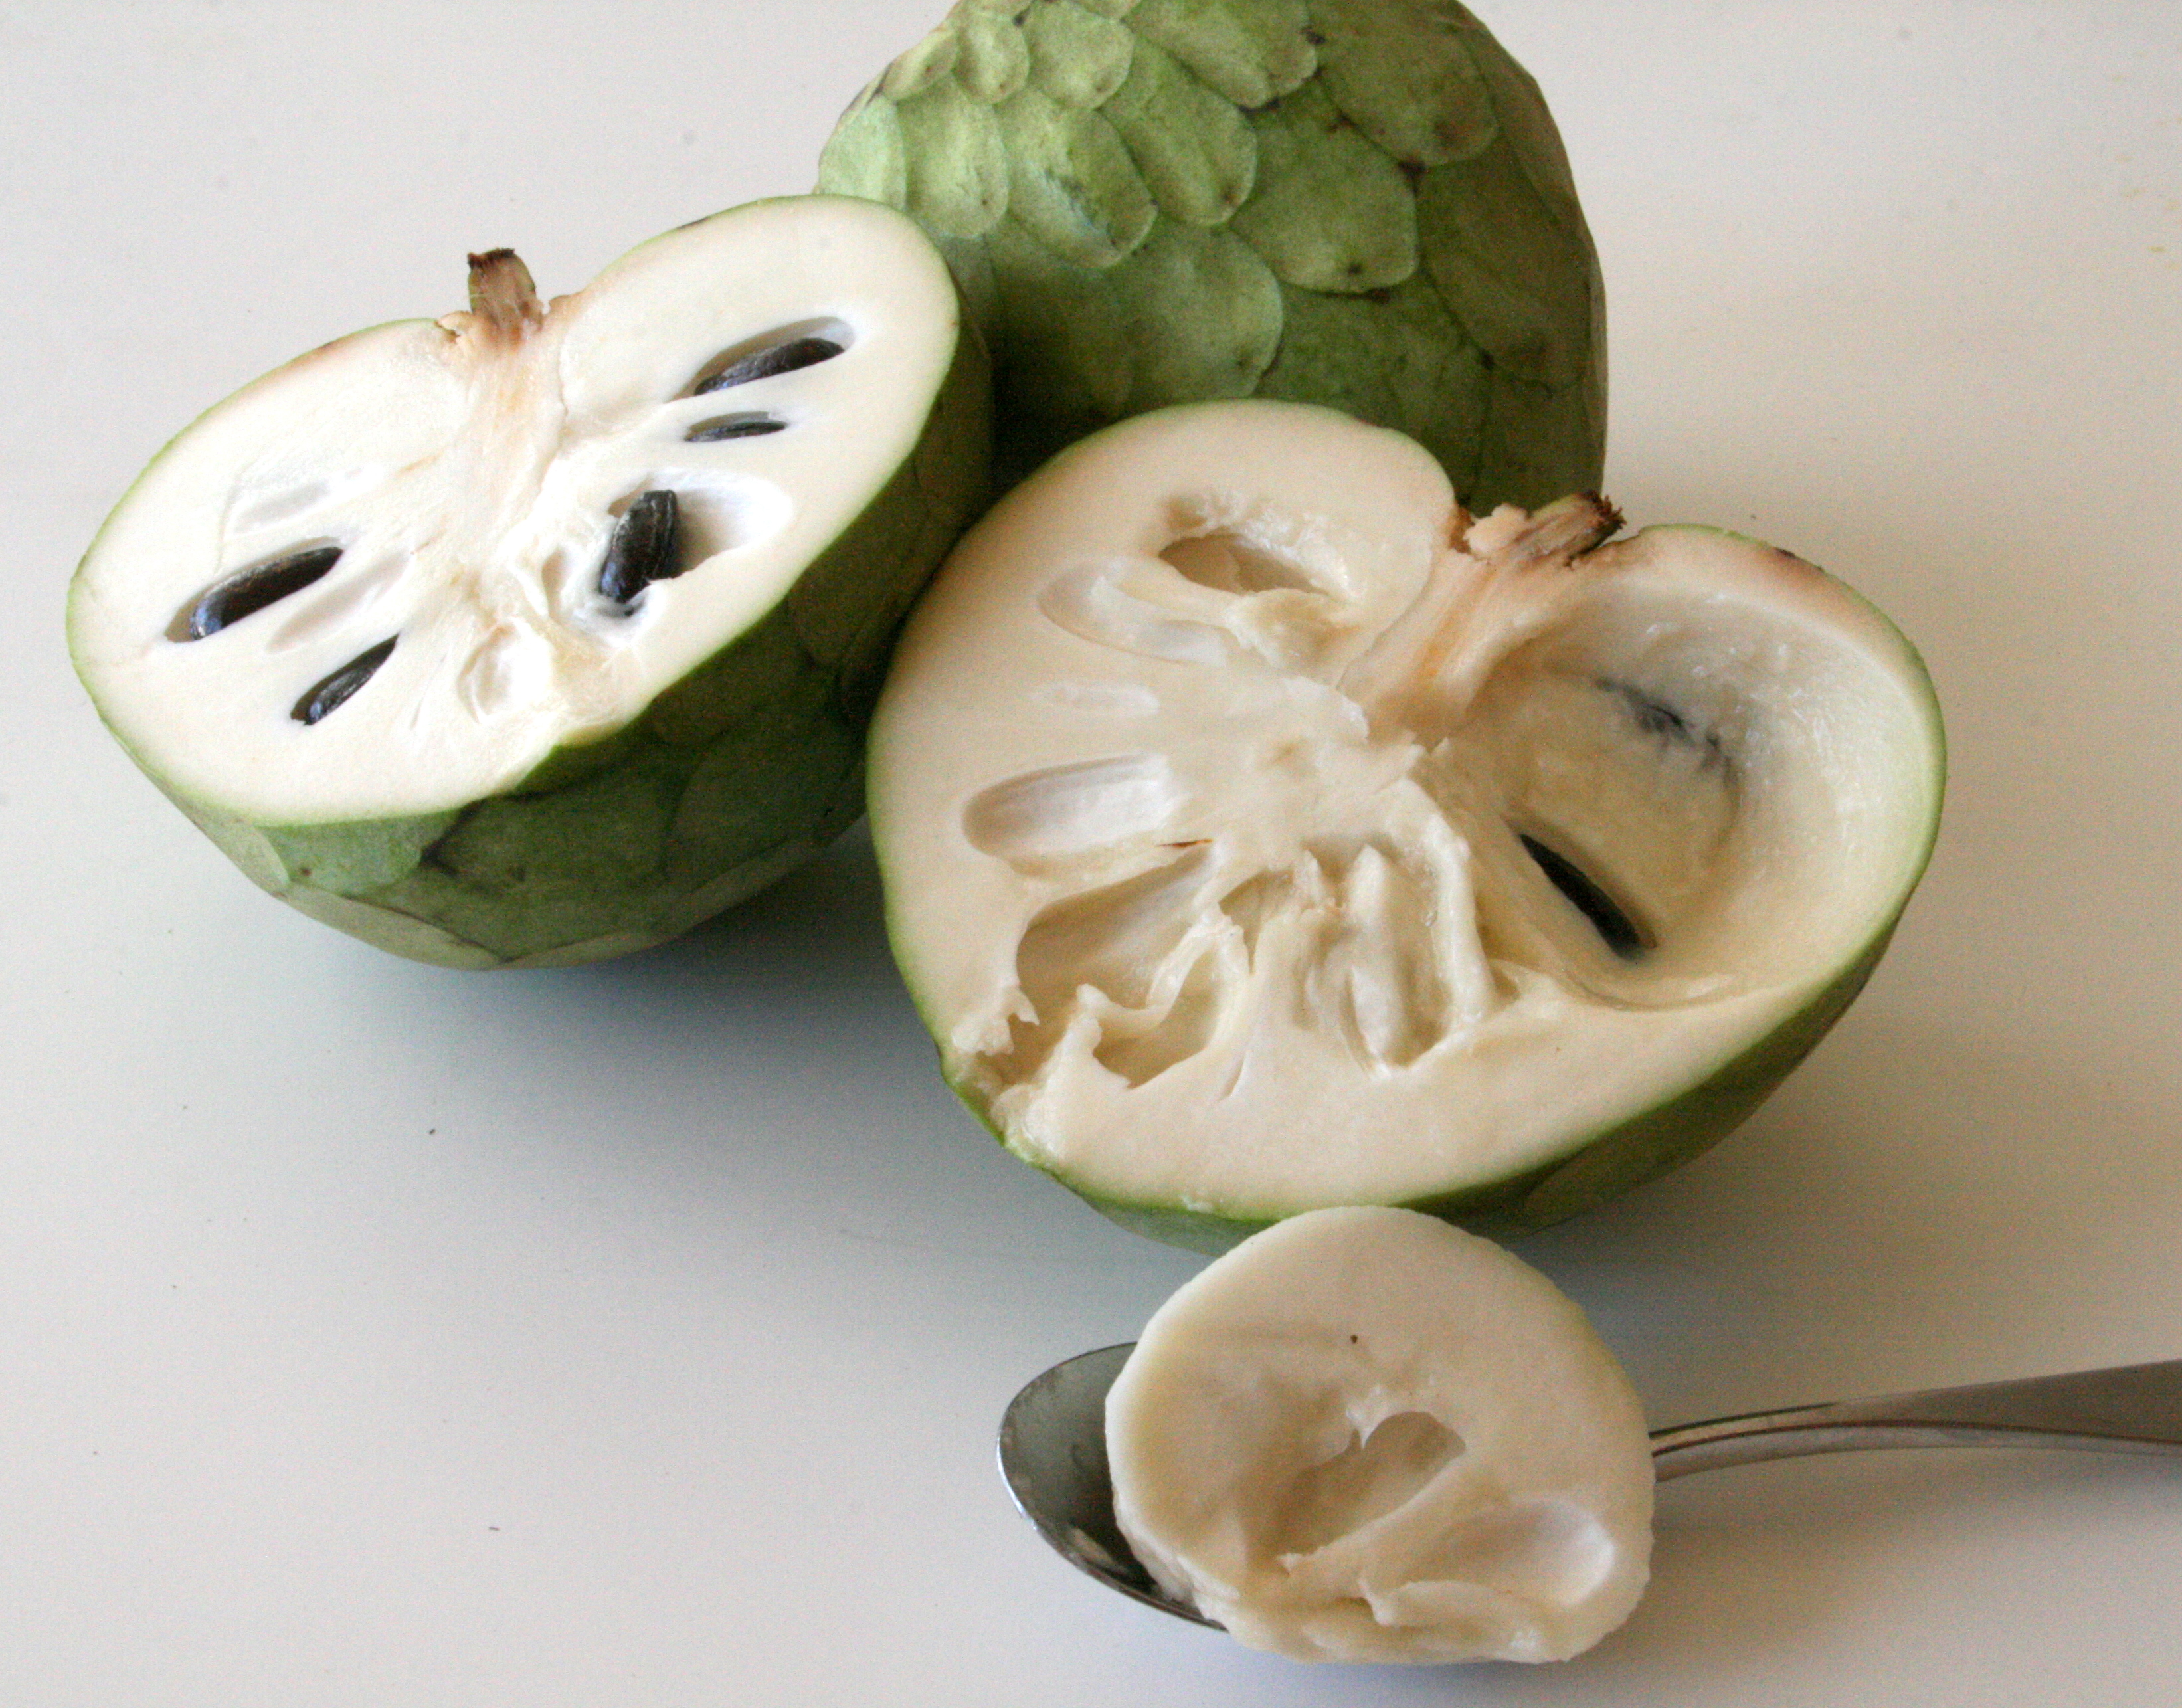 Exotic-fruits-and-their-health-benefits-6